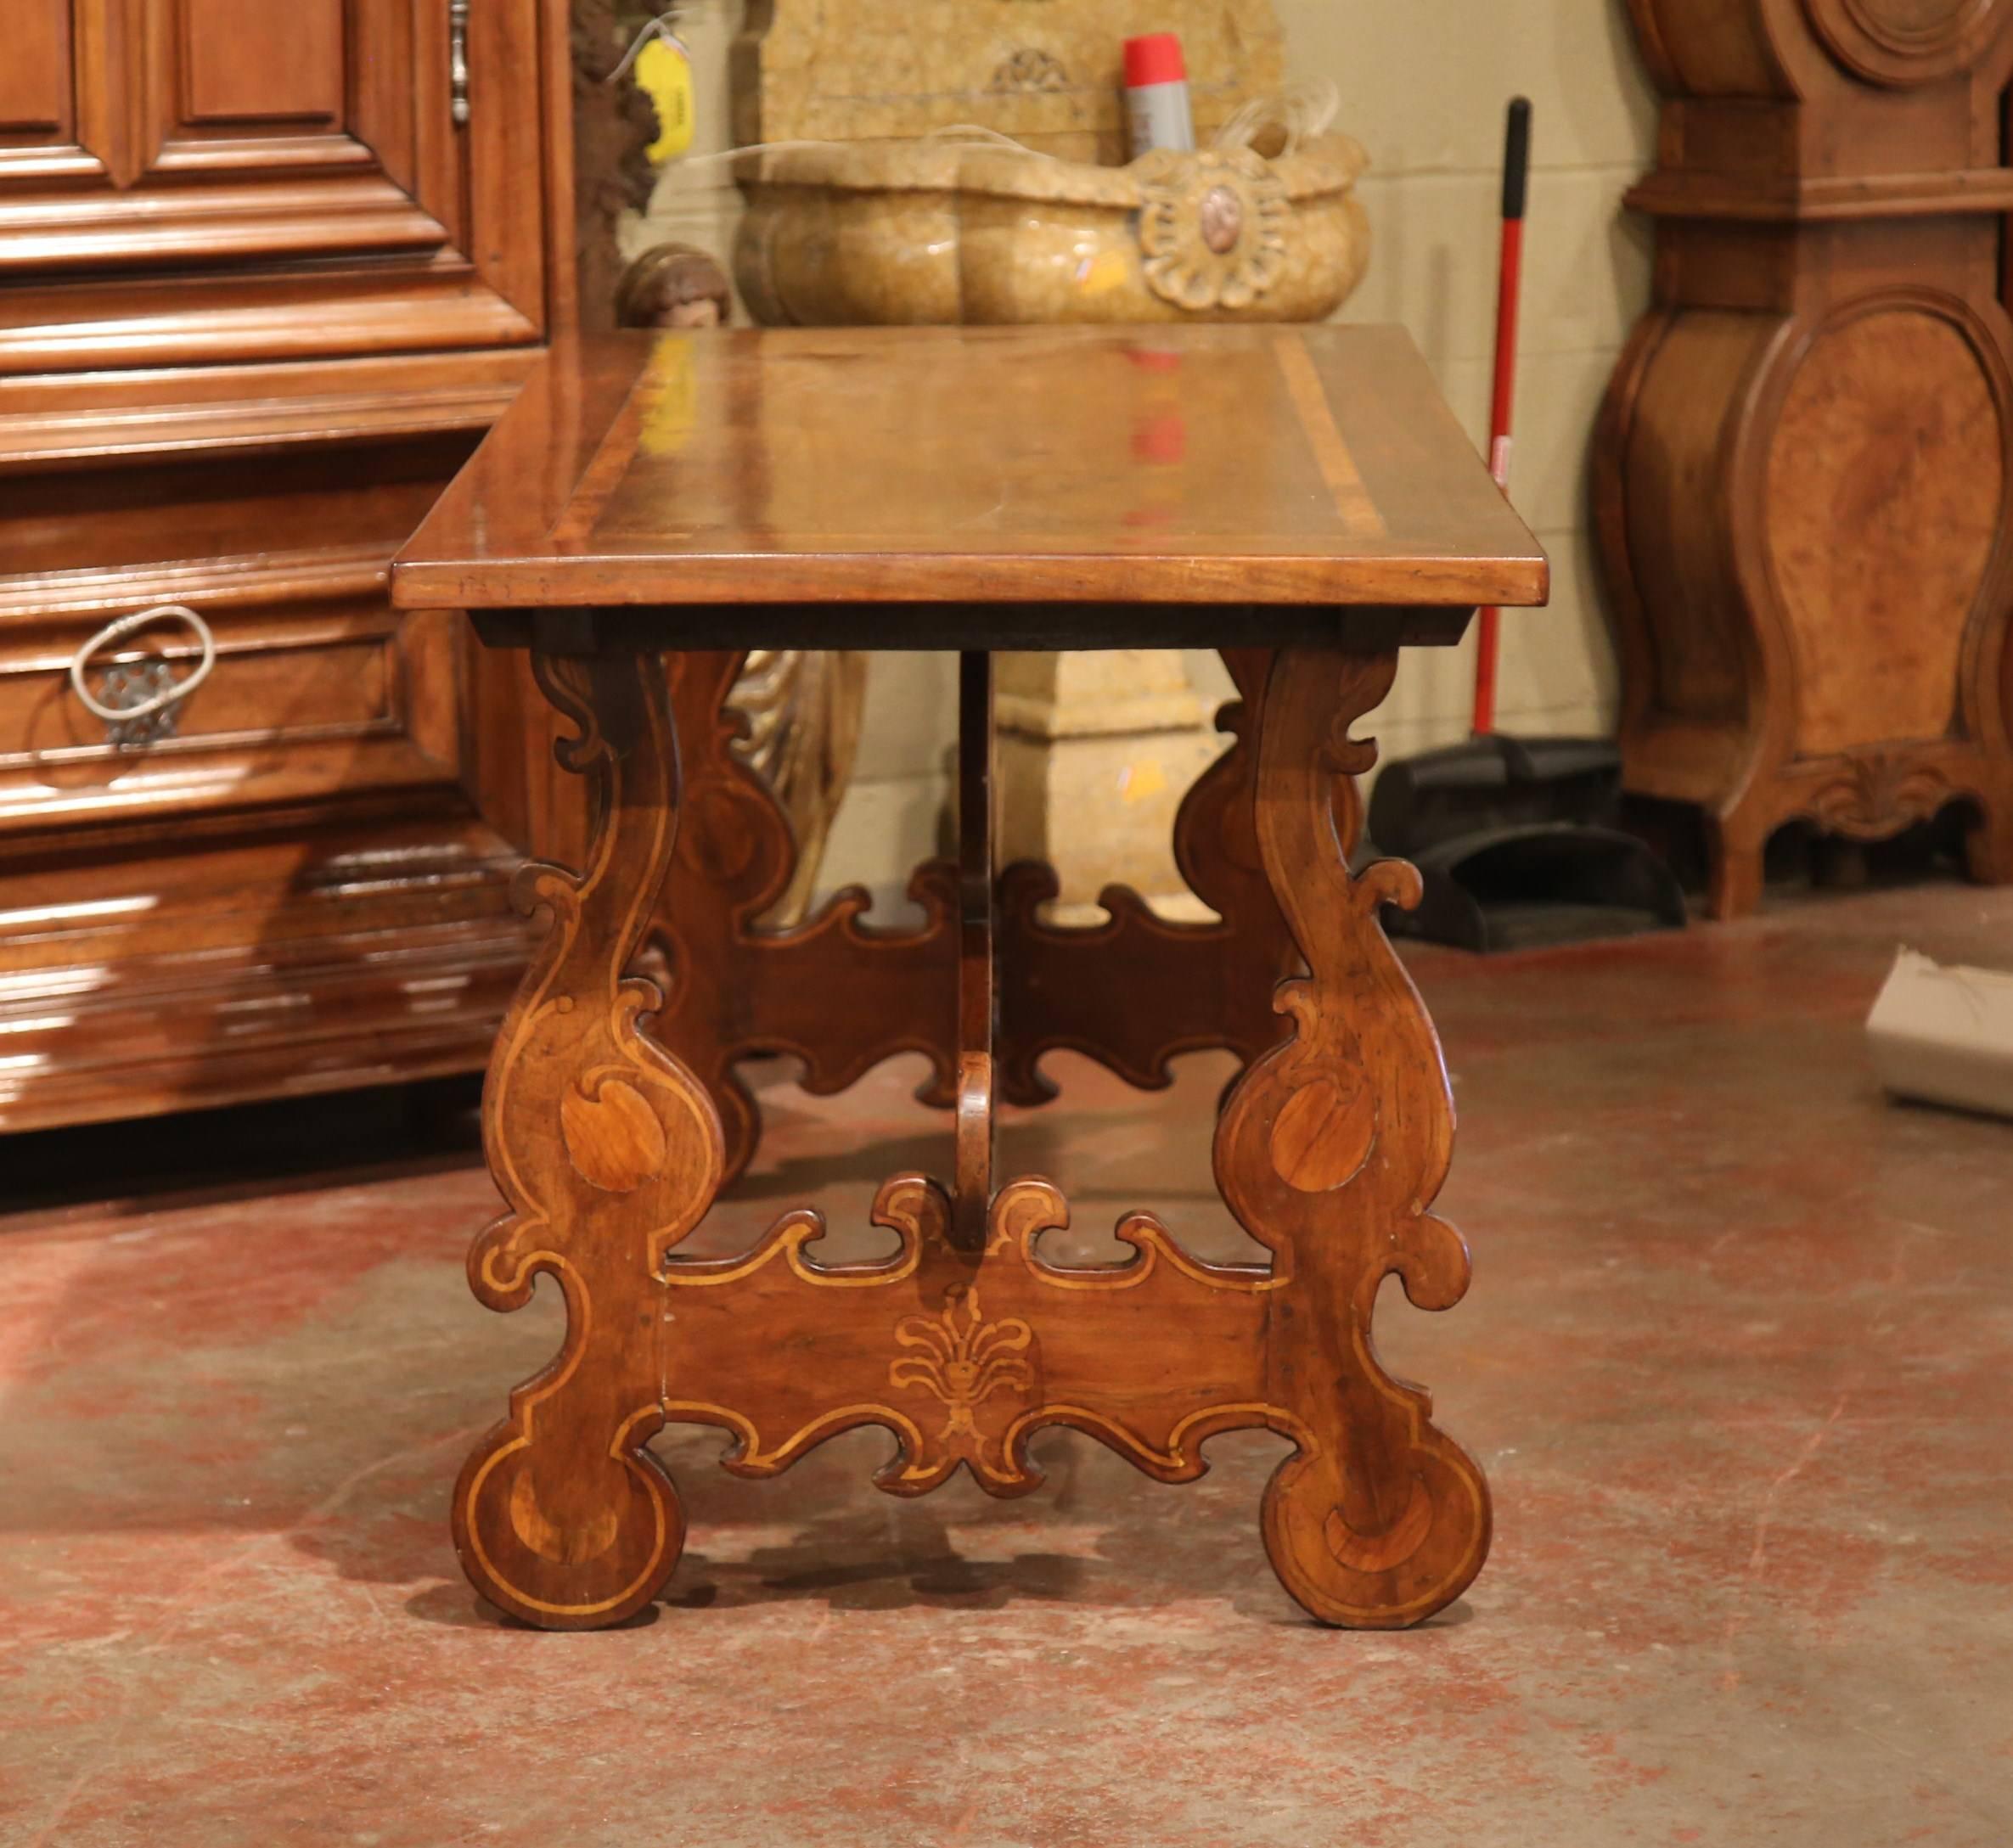 19th Century Italian Carved Walnut Trestle Table with Decorative Inlay Motifs 1